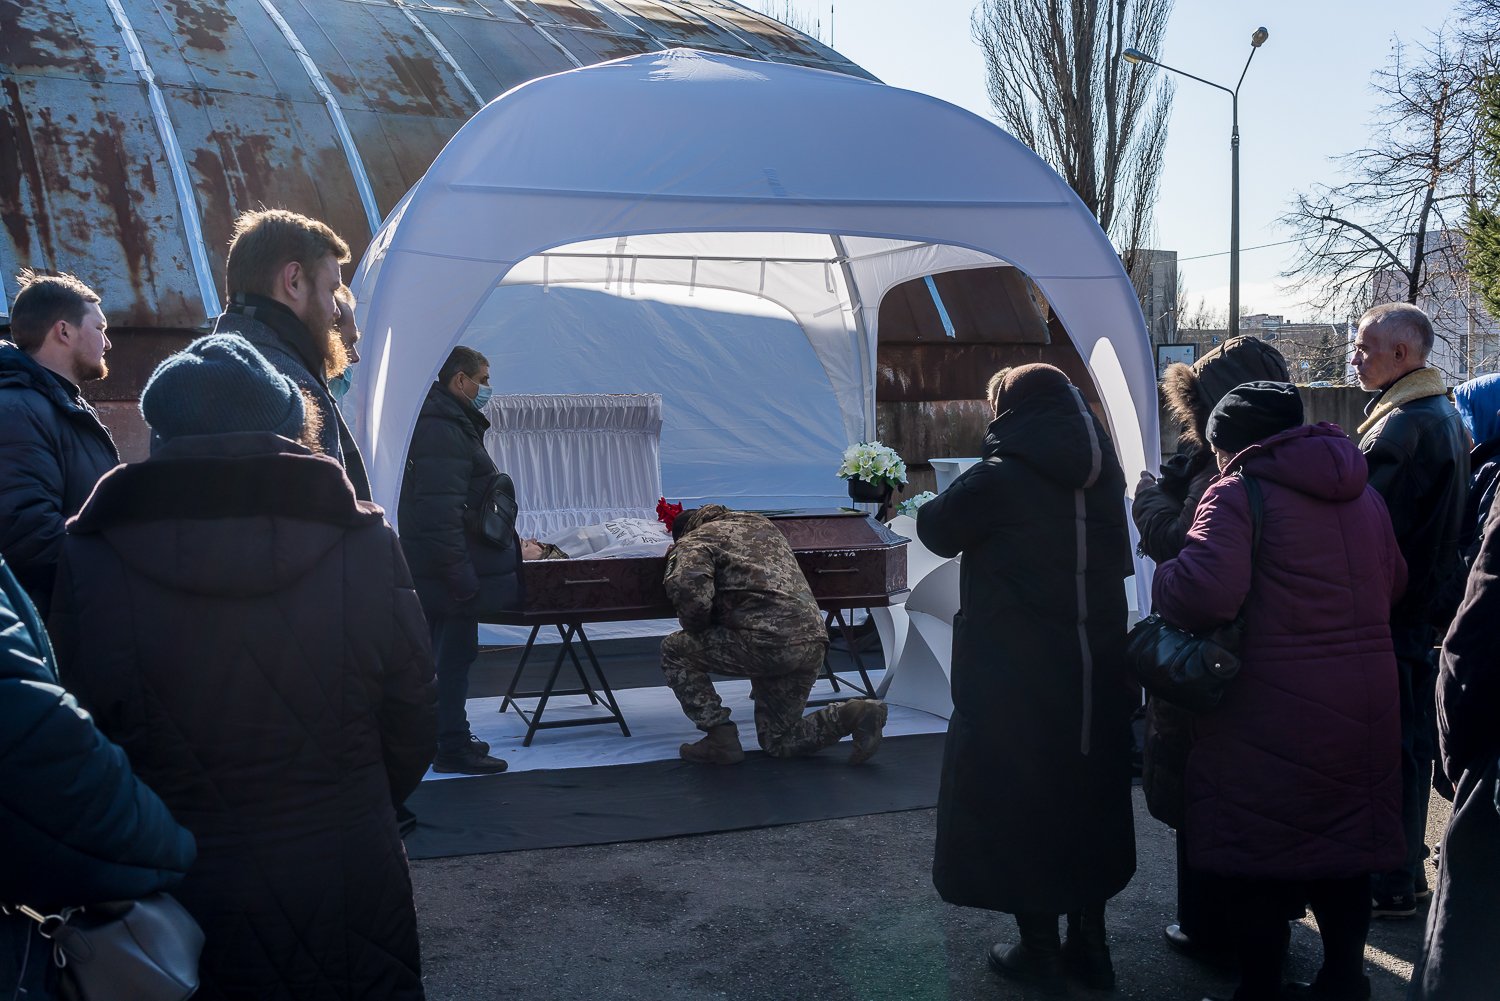  The funeral for Captain Anton Sidorov, a 35-year-old Ukrainian intelligence officer killed three days earlier while serving on the front line in eastern Ukraine, is held at Lukyanivskyi Cemetery on Tuesday, February 22, 2022 in Kyiv, Ukraine. 